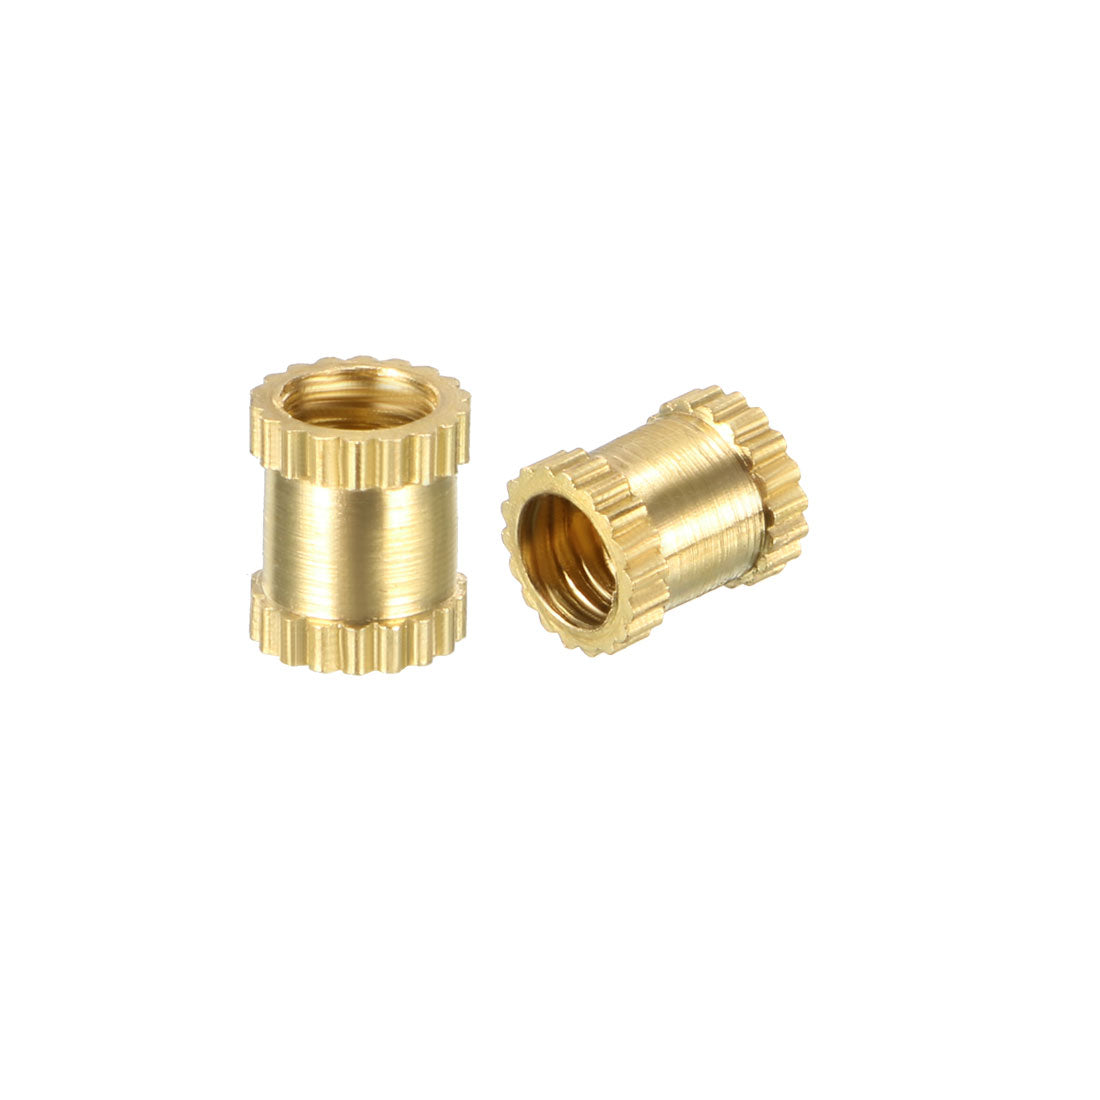 uxcell Uxcell Knurled Insert Nuts - Female Thread Brass Threaded Insert Embedment Nut for 3D Printer